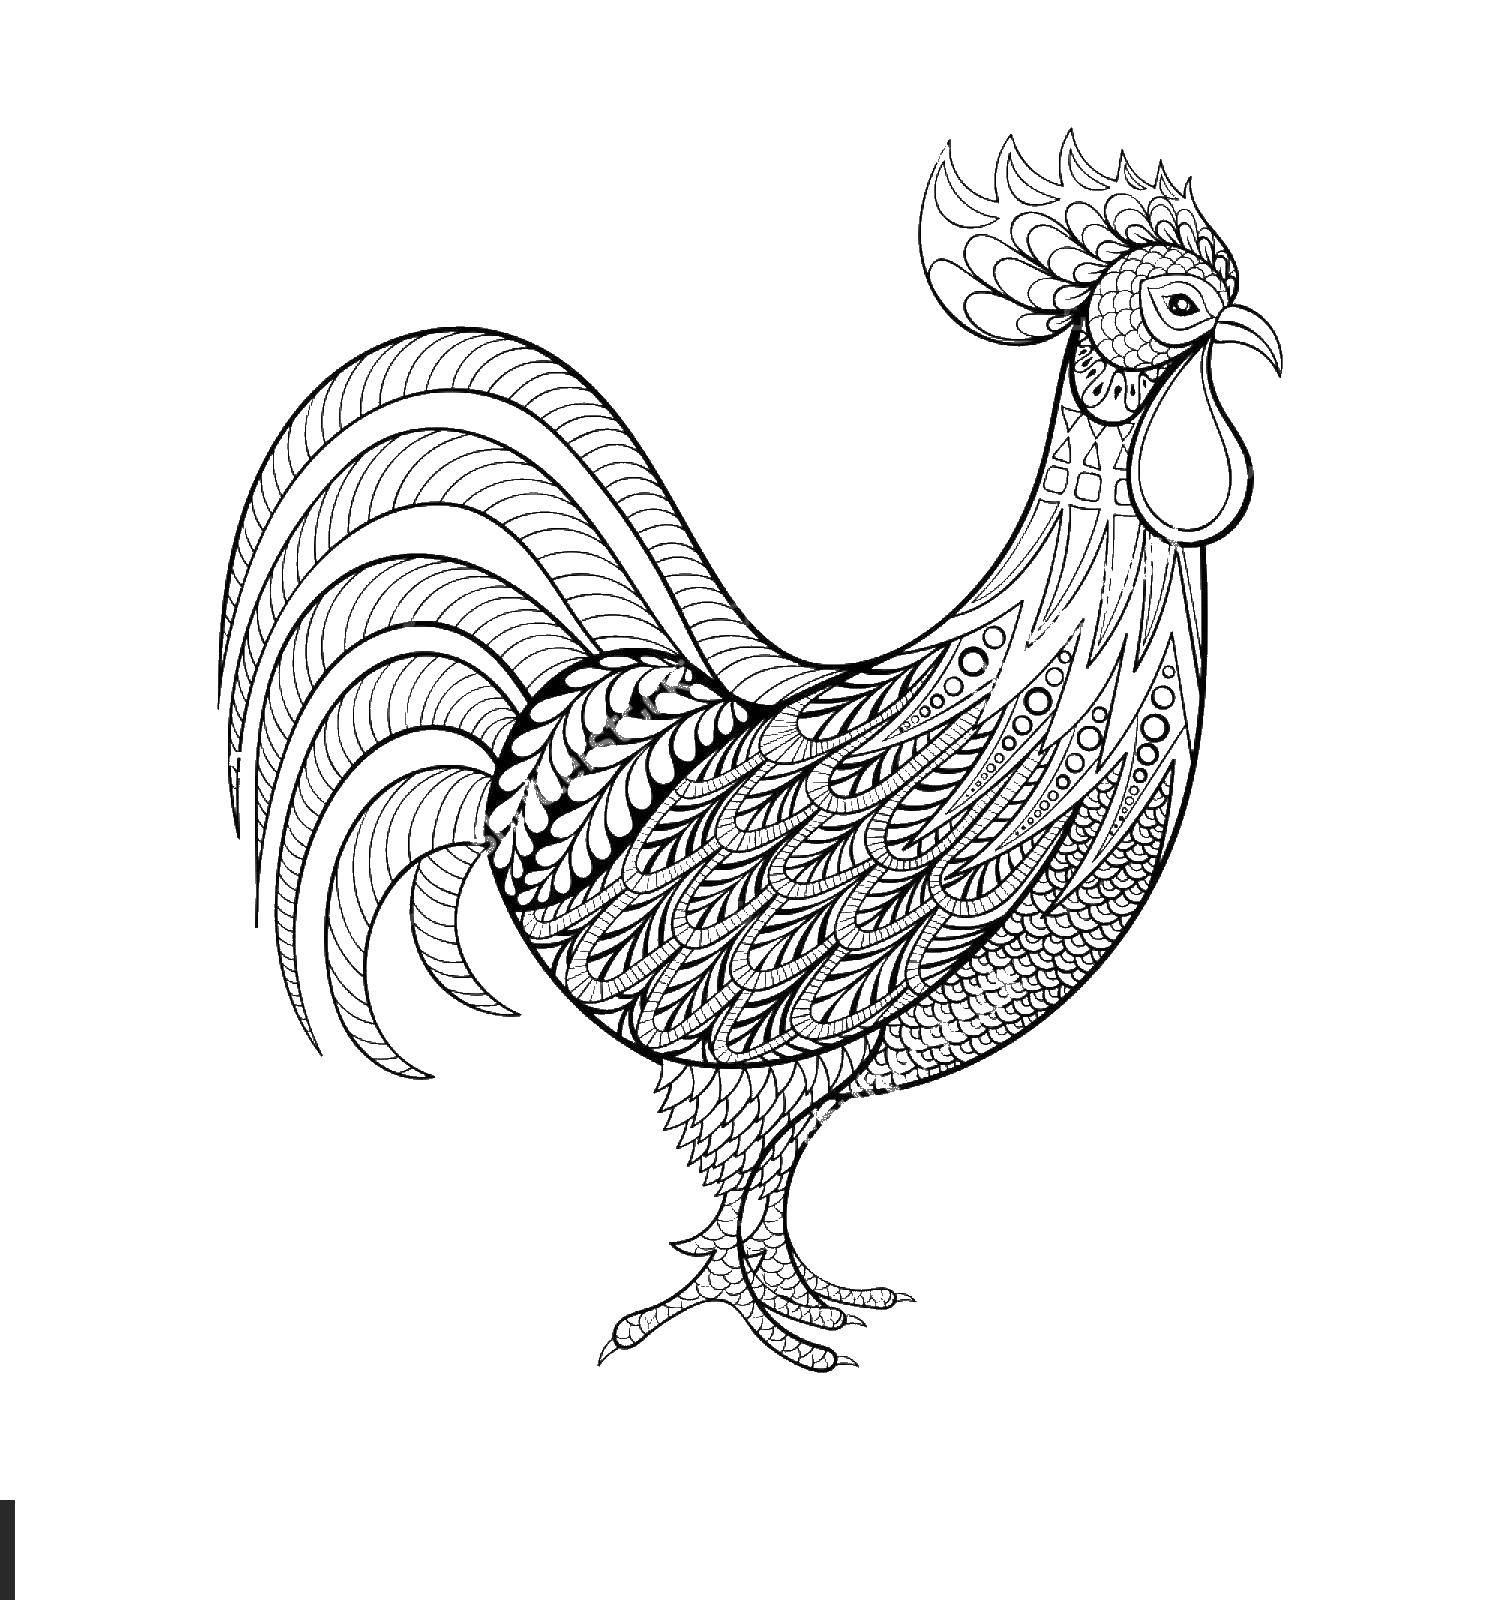 Coloring Cock. Category birds. Tags:  rooster, bird.